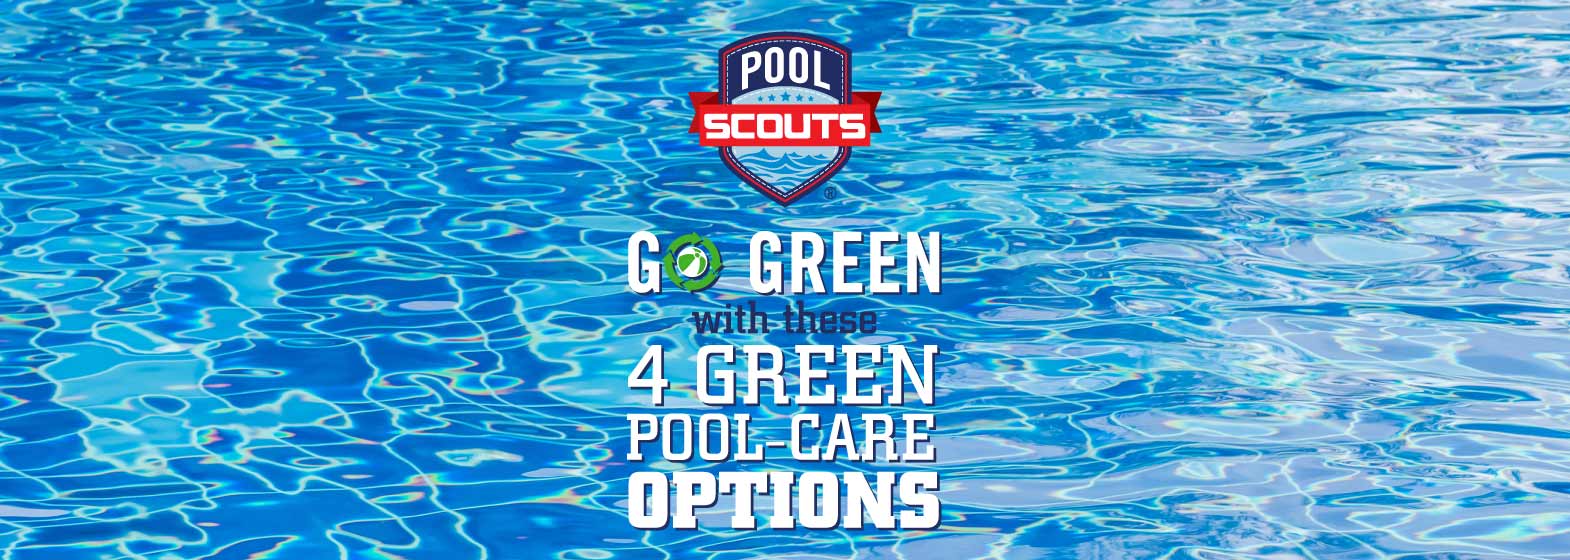 Clean pool water that's been treated with green pool care treatment